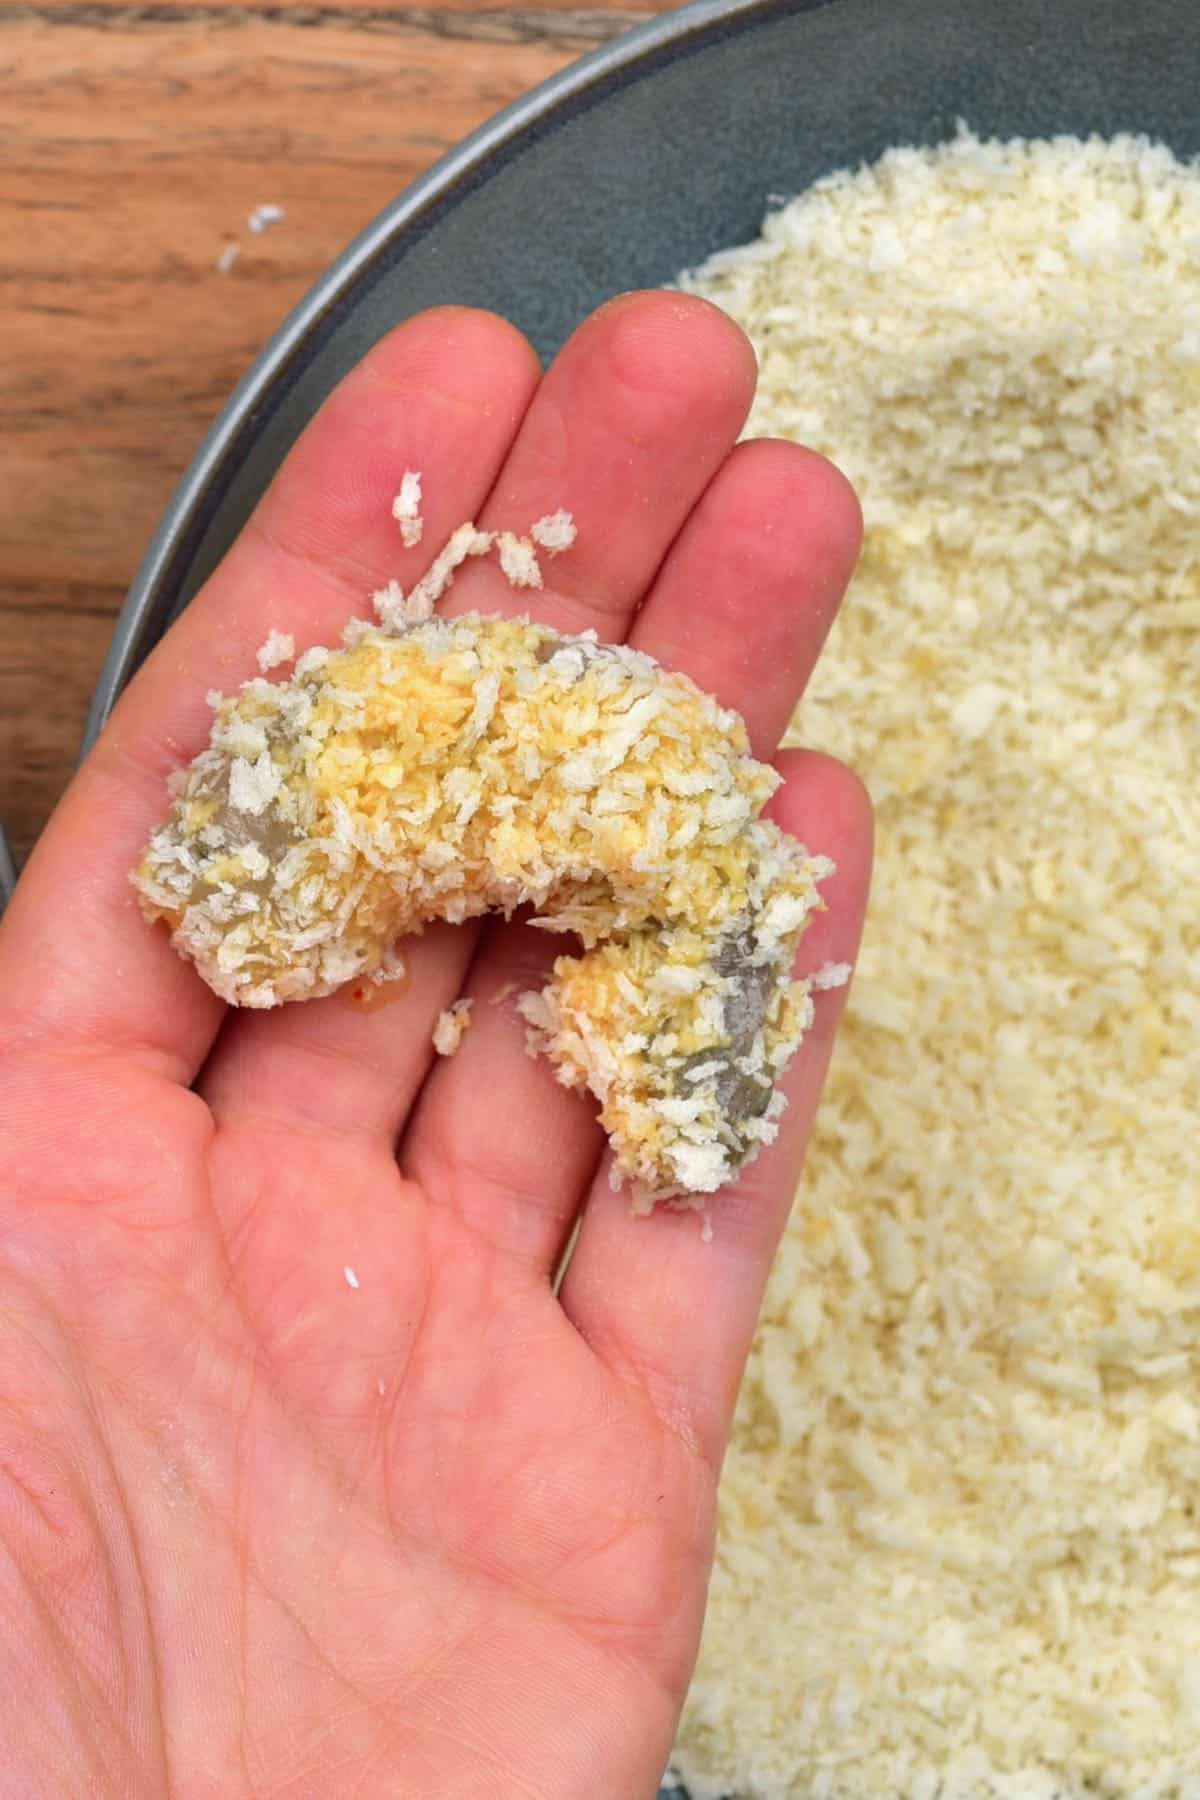 A hand holding a shrimp coated in breadcrumbs and coconut